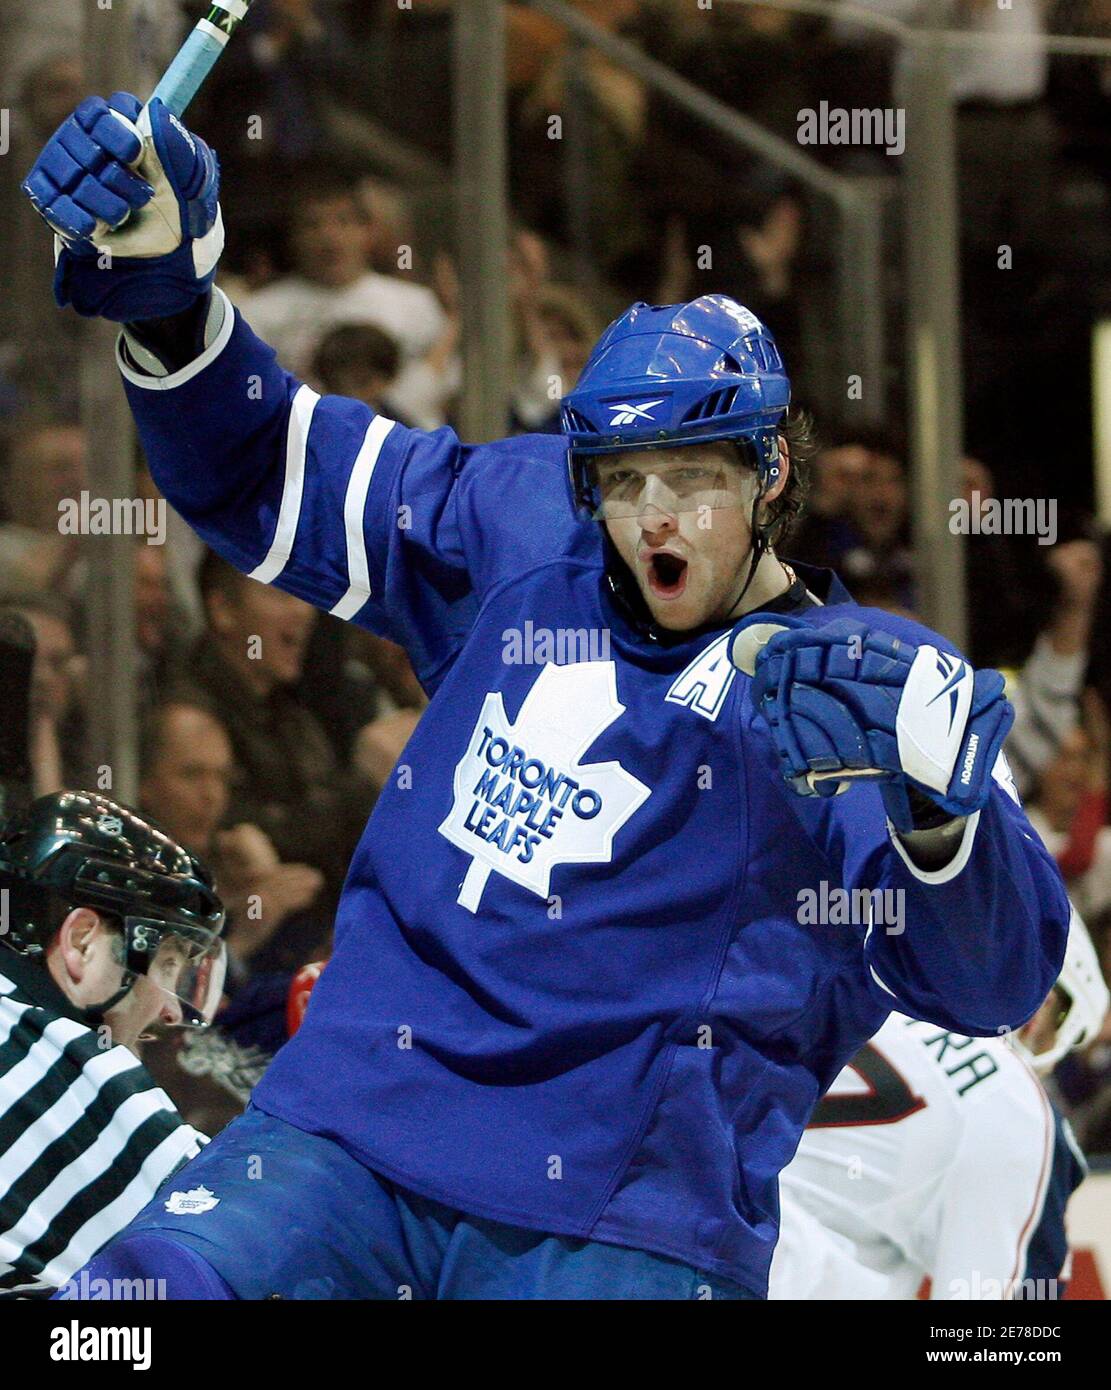 Toronto Maple Leafs forward Nik Antropov celebrates his second goal of the  game against the Columbus Blue Jackets during the second period of their  NHL hockey game in Toronto February 19, 2009.